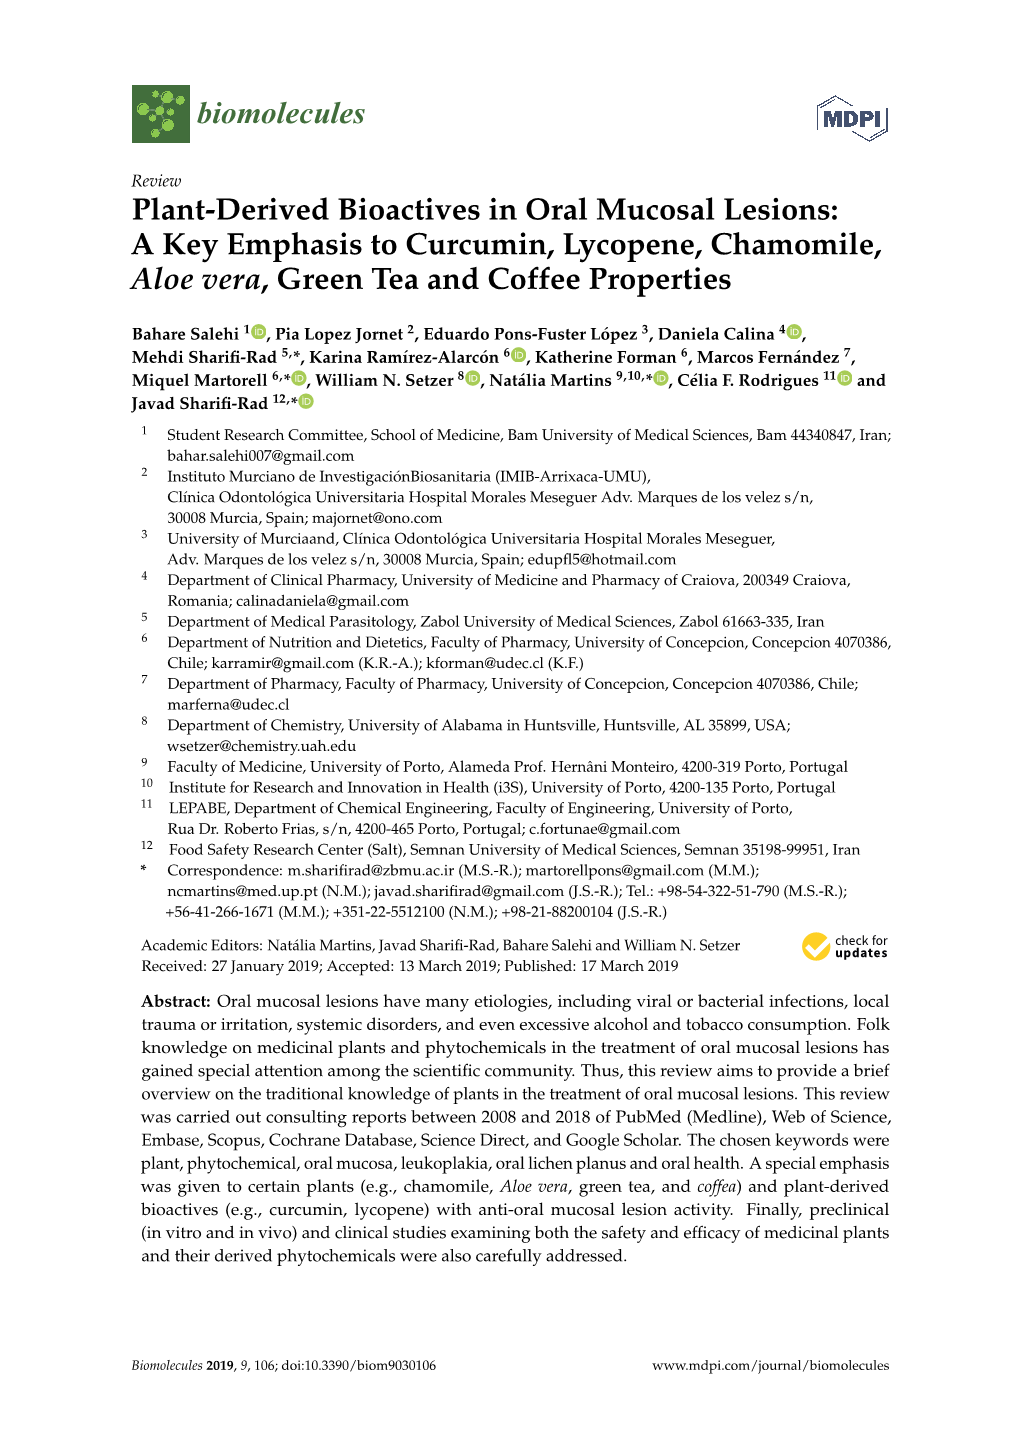 Plant-Derived Bioactives in Oral Mucosal Lesions: a Key Emphasis to Curcumin, Lycopene, Chamomile, Aloe Vera, Green Tea and Coffee Properties